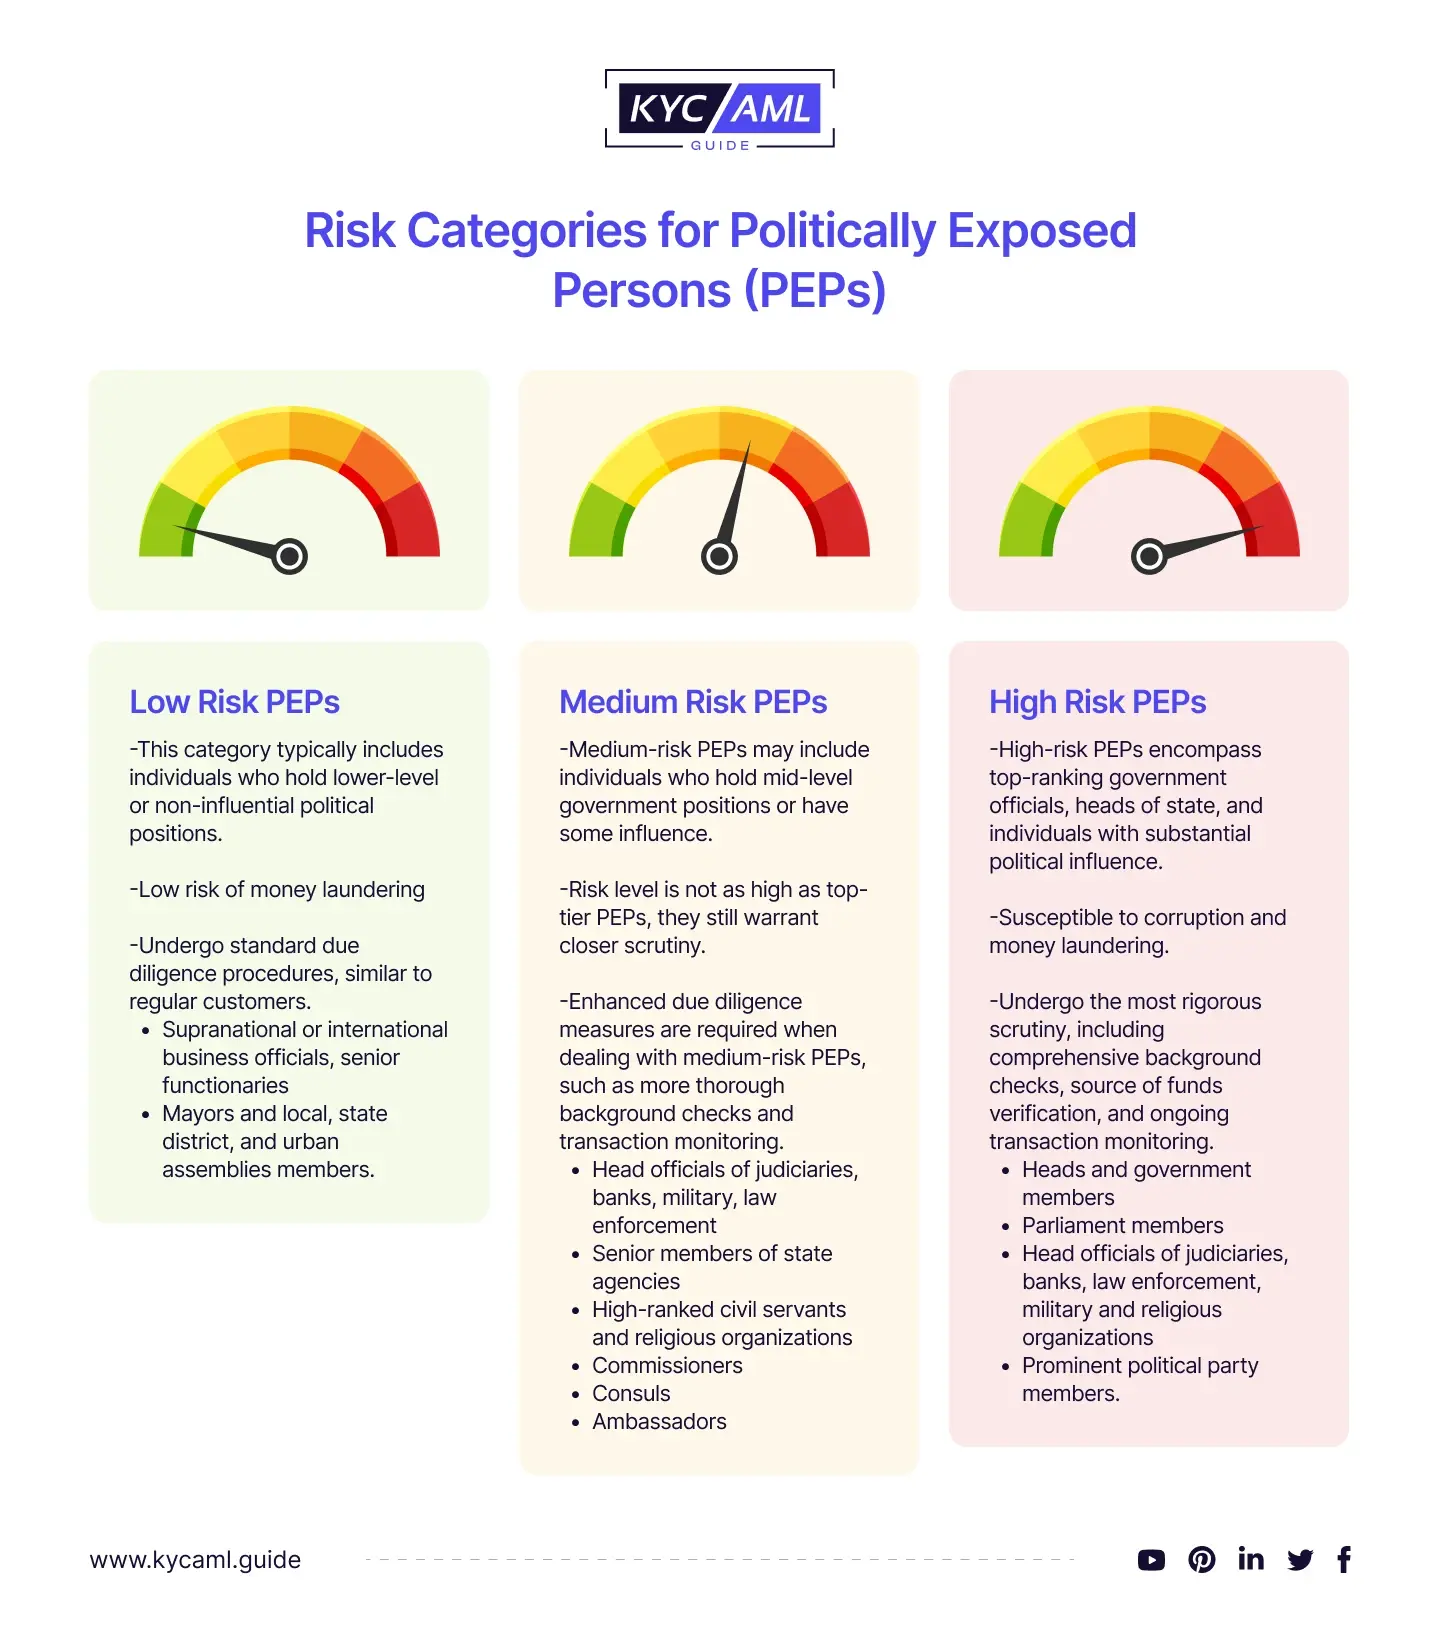 Risk Categories for Politically Exposed Persons (PEPs)